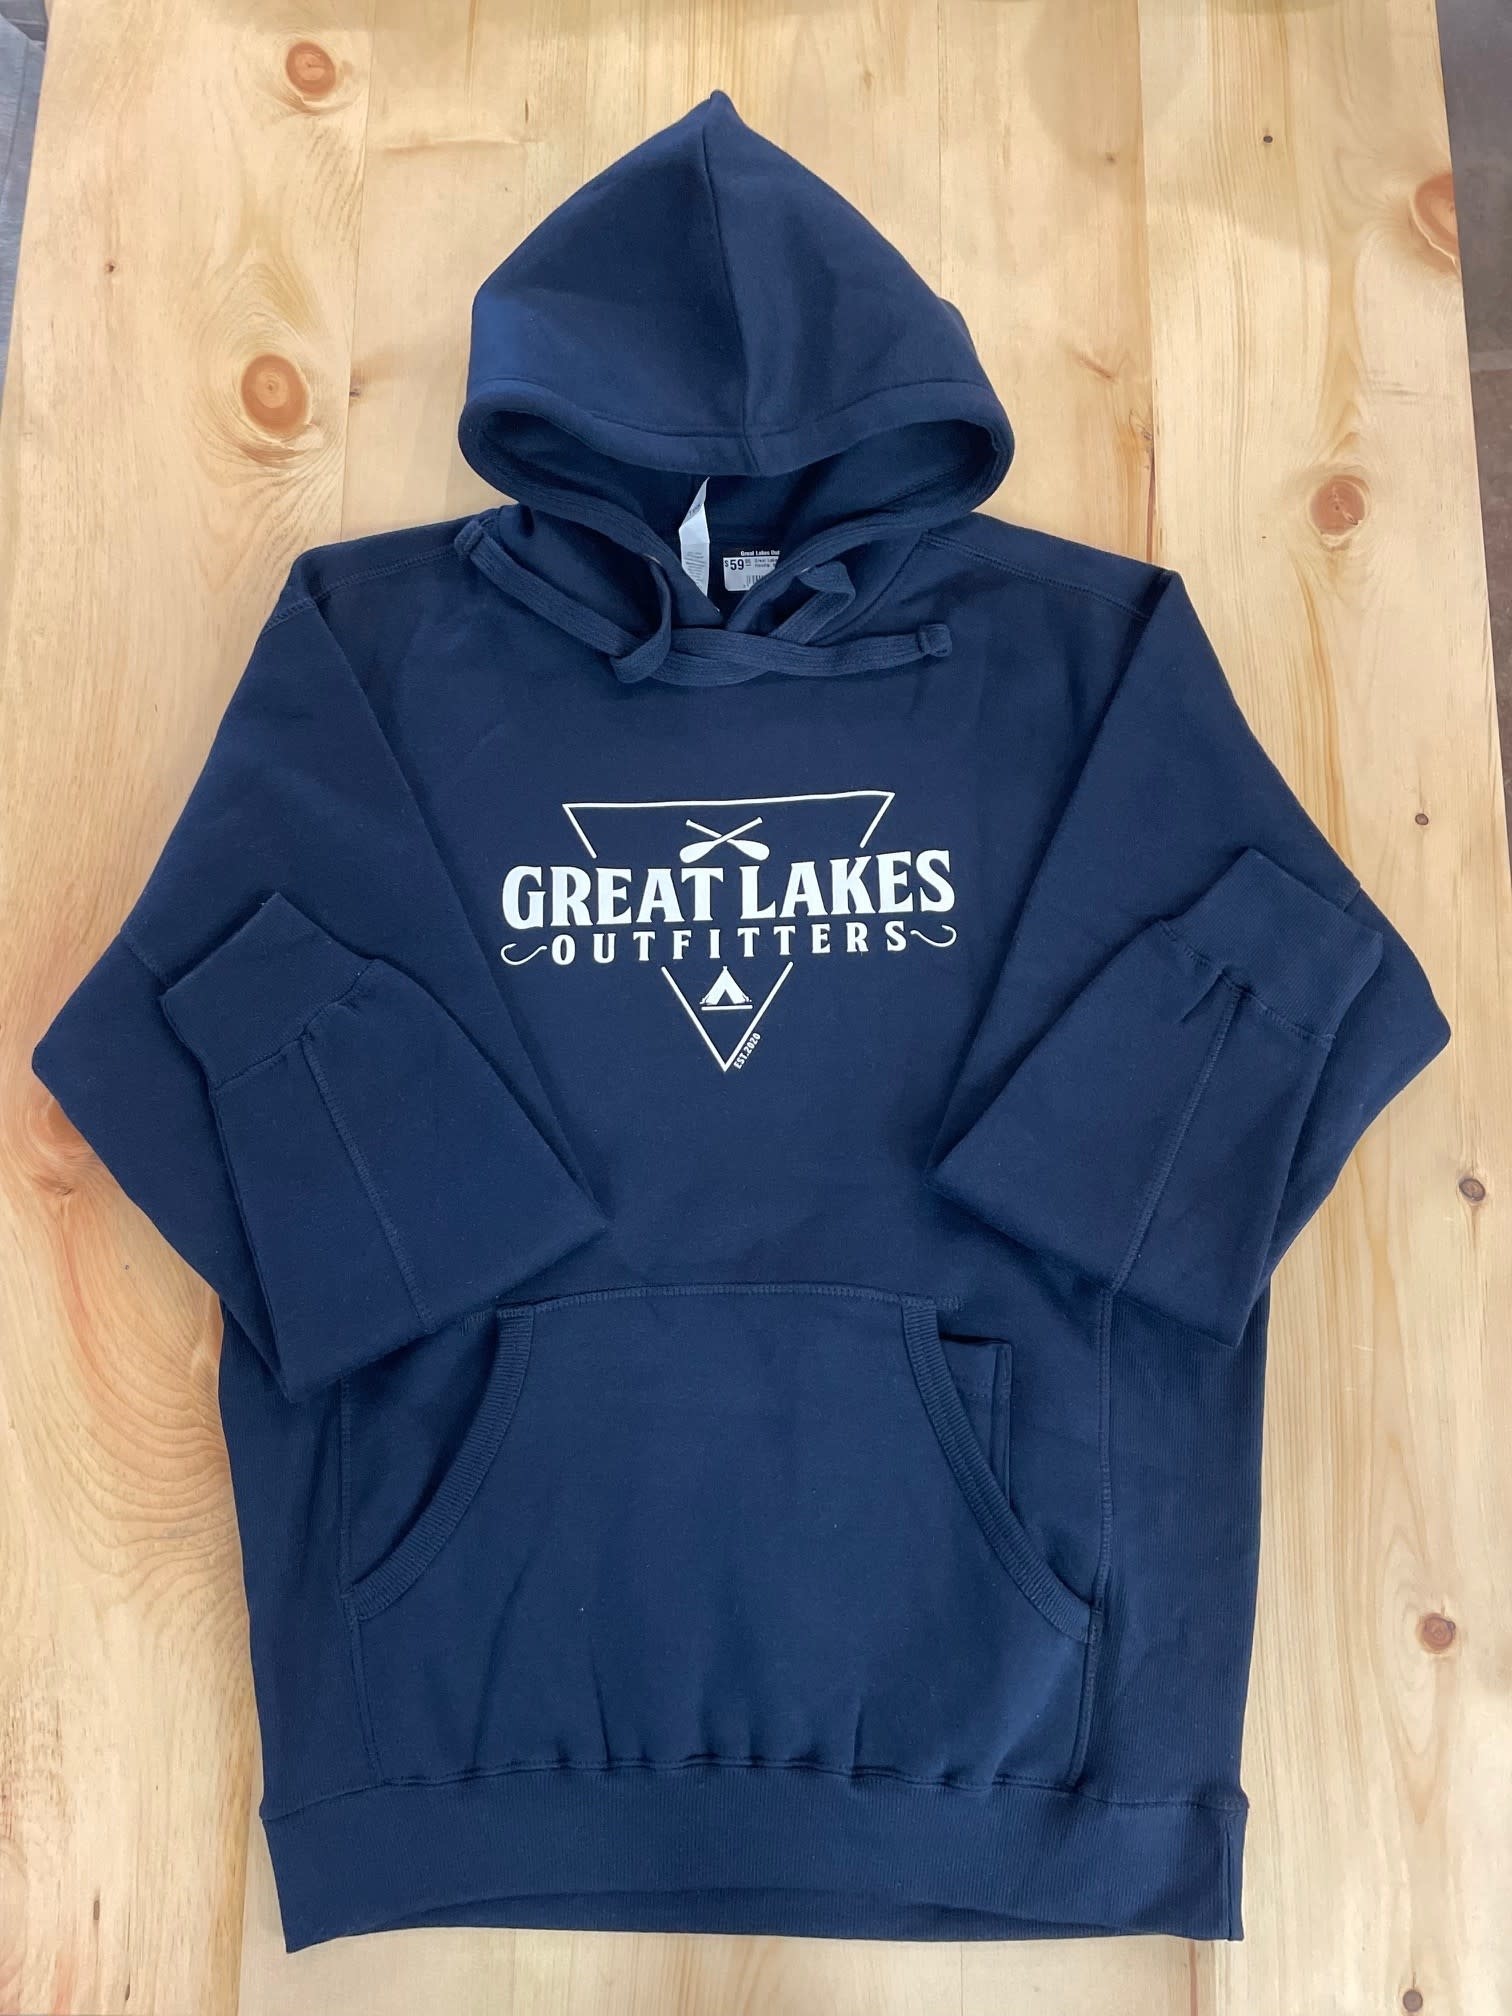 Great Lakes Outfitters Hoodie